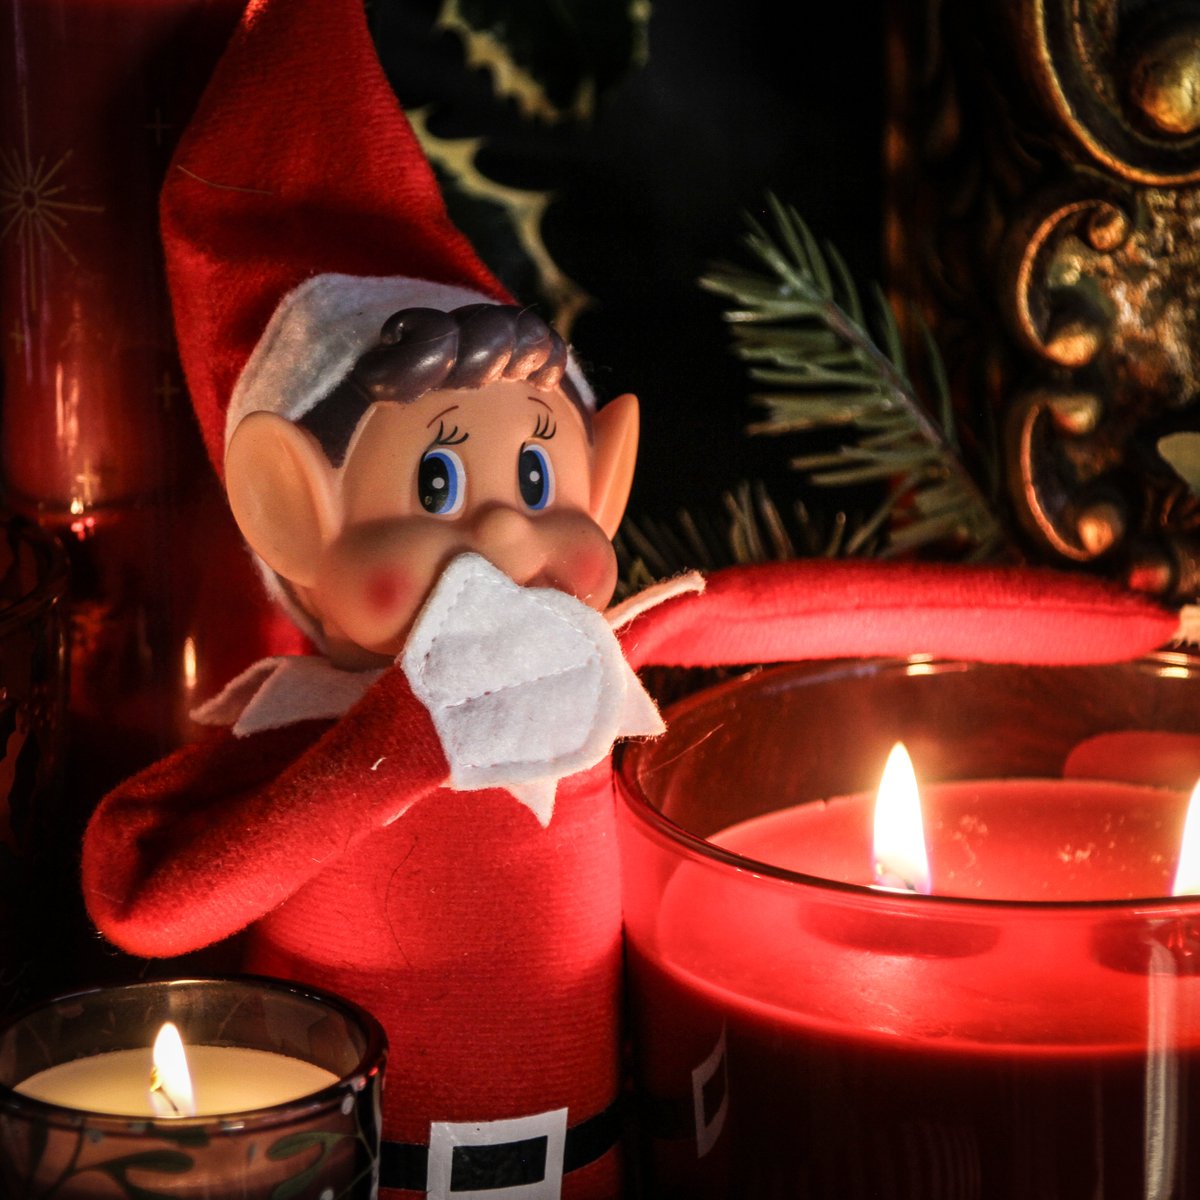 What’s even hotter than this Christmas’s hottest gift? 🤔 This elf’s hands after a candle catastrophe! 🕯 (Note: this joke was funnier in our heads) If like our elf you manage to get a nasty burn, the priority is to cool the area as quickly as possible. #ElfOnTheShelf ‌